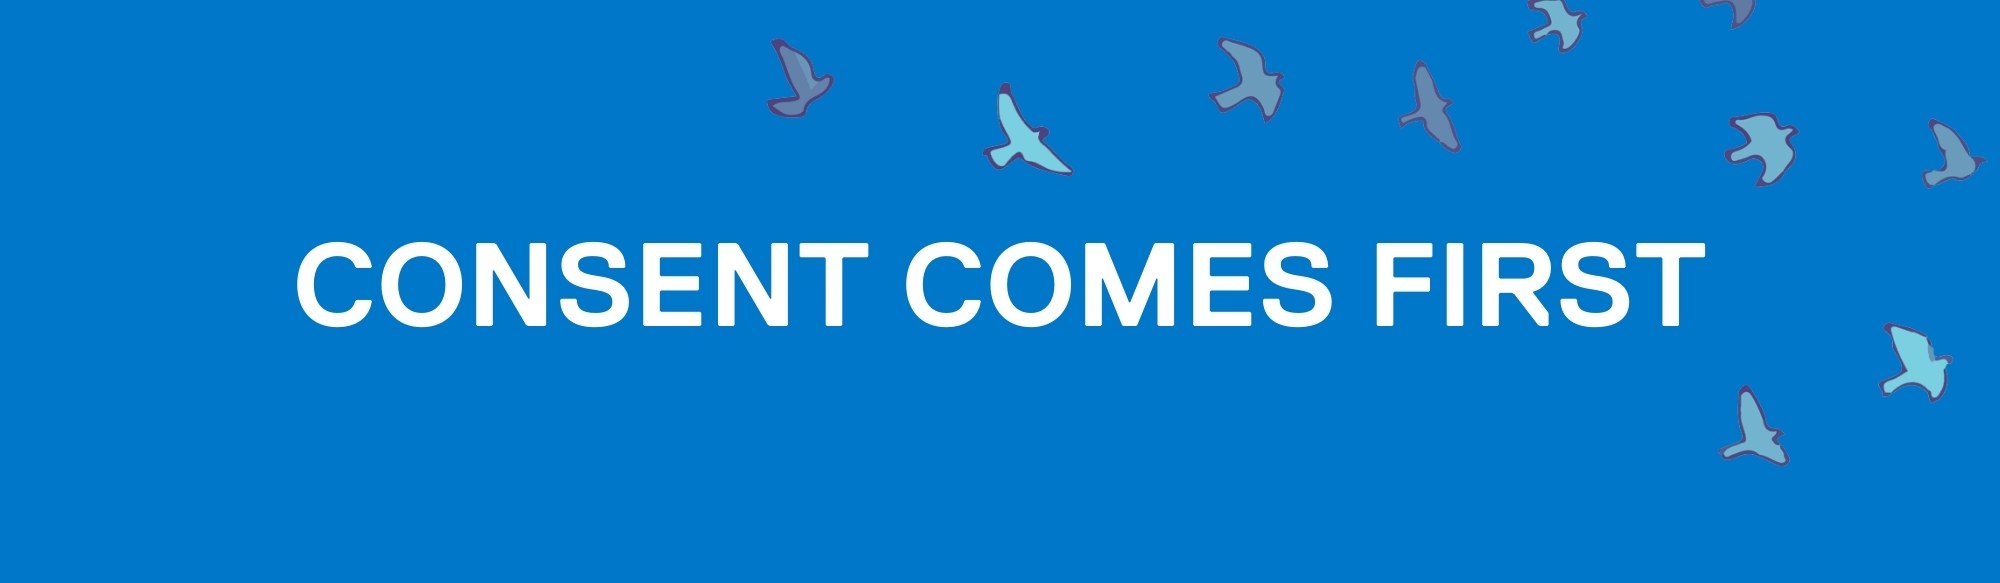 Graphic of the text "consent comes first" on top of a blue background with birds flying in the corner.